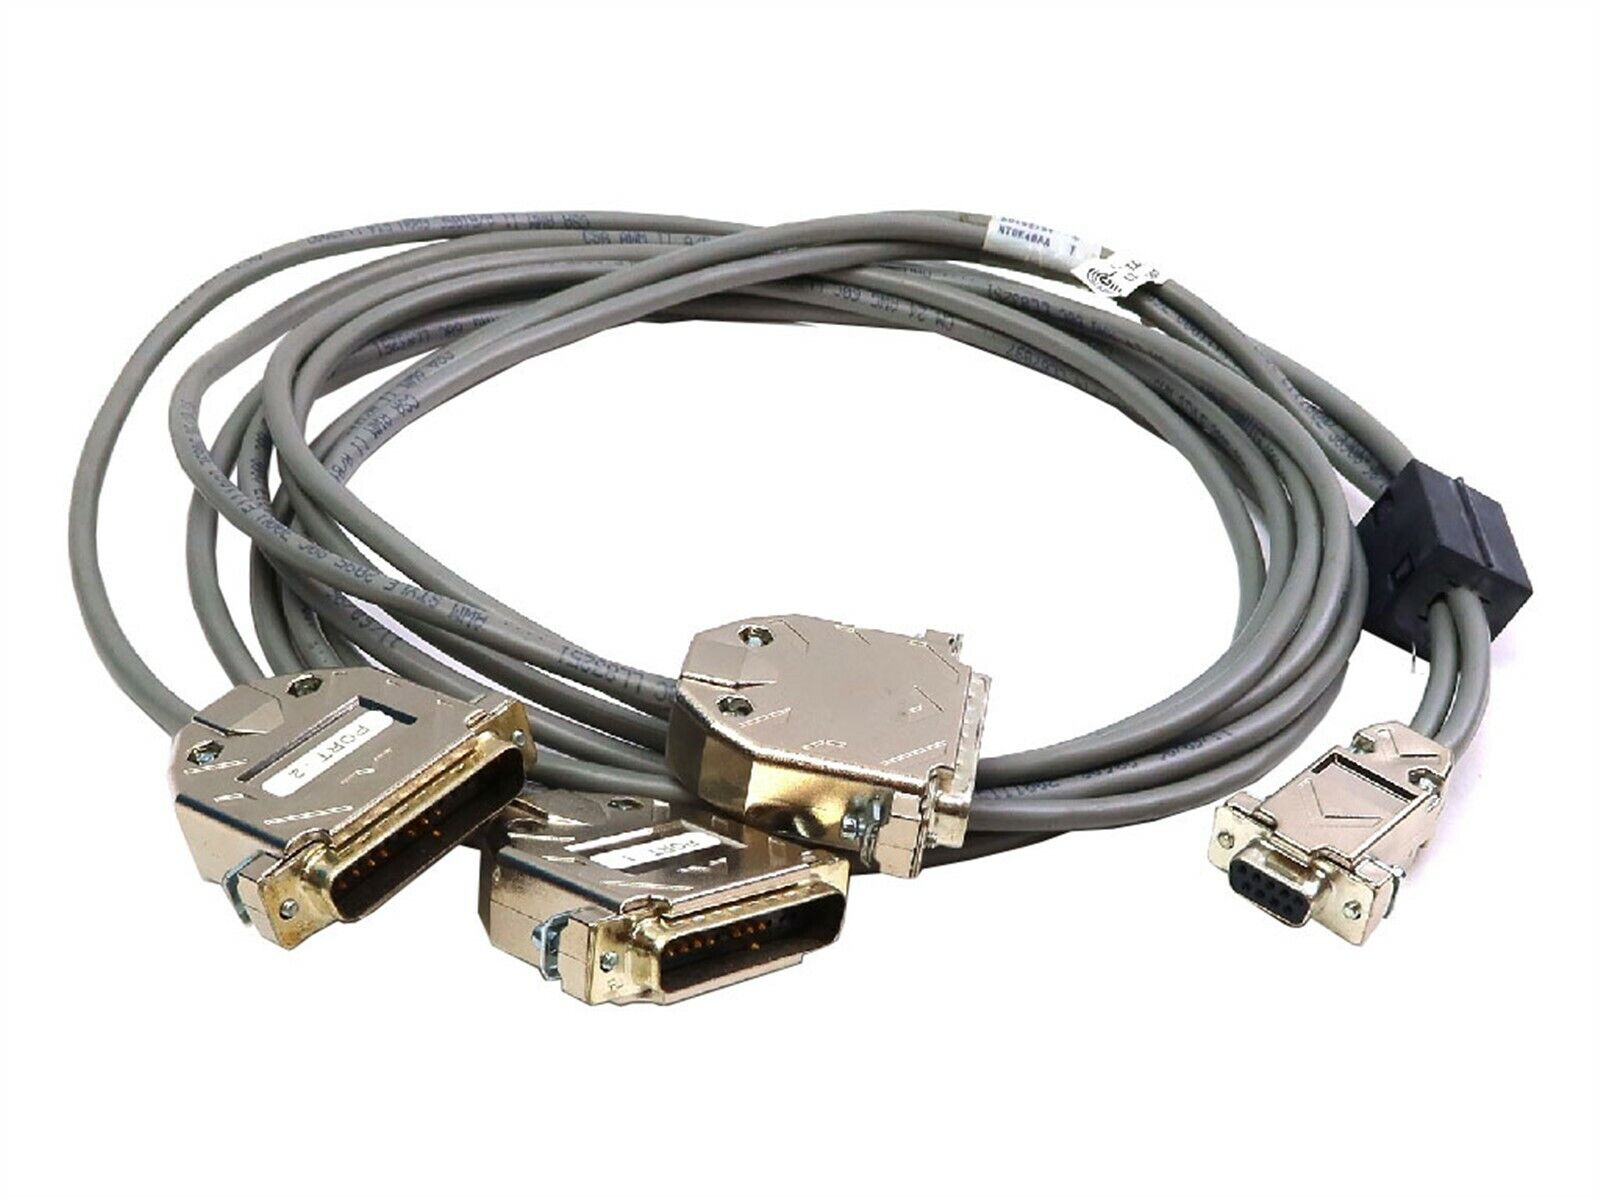 NORTEL 5FT DB-9 FEMALE TO 3X DB-25 MALE 3-PORT SDI CABLE ASSEMBLY NTBK48AA